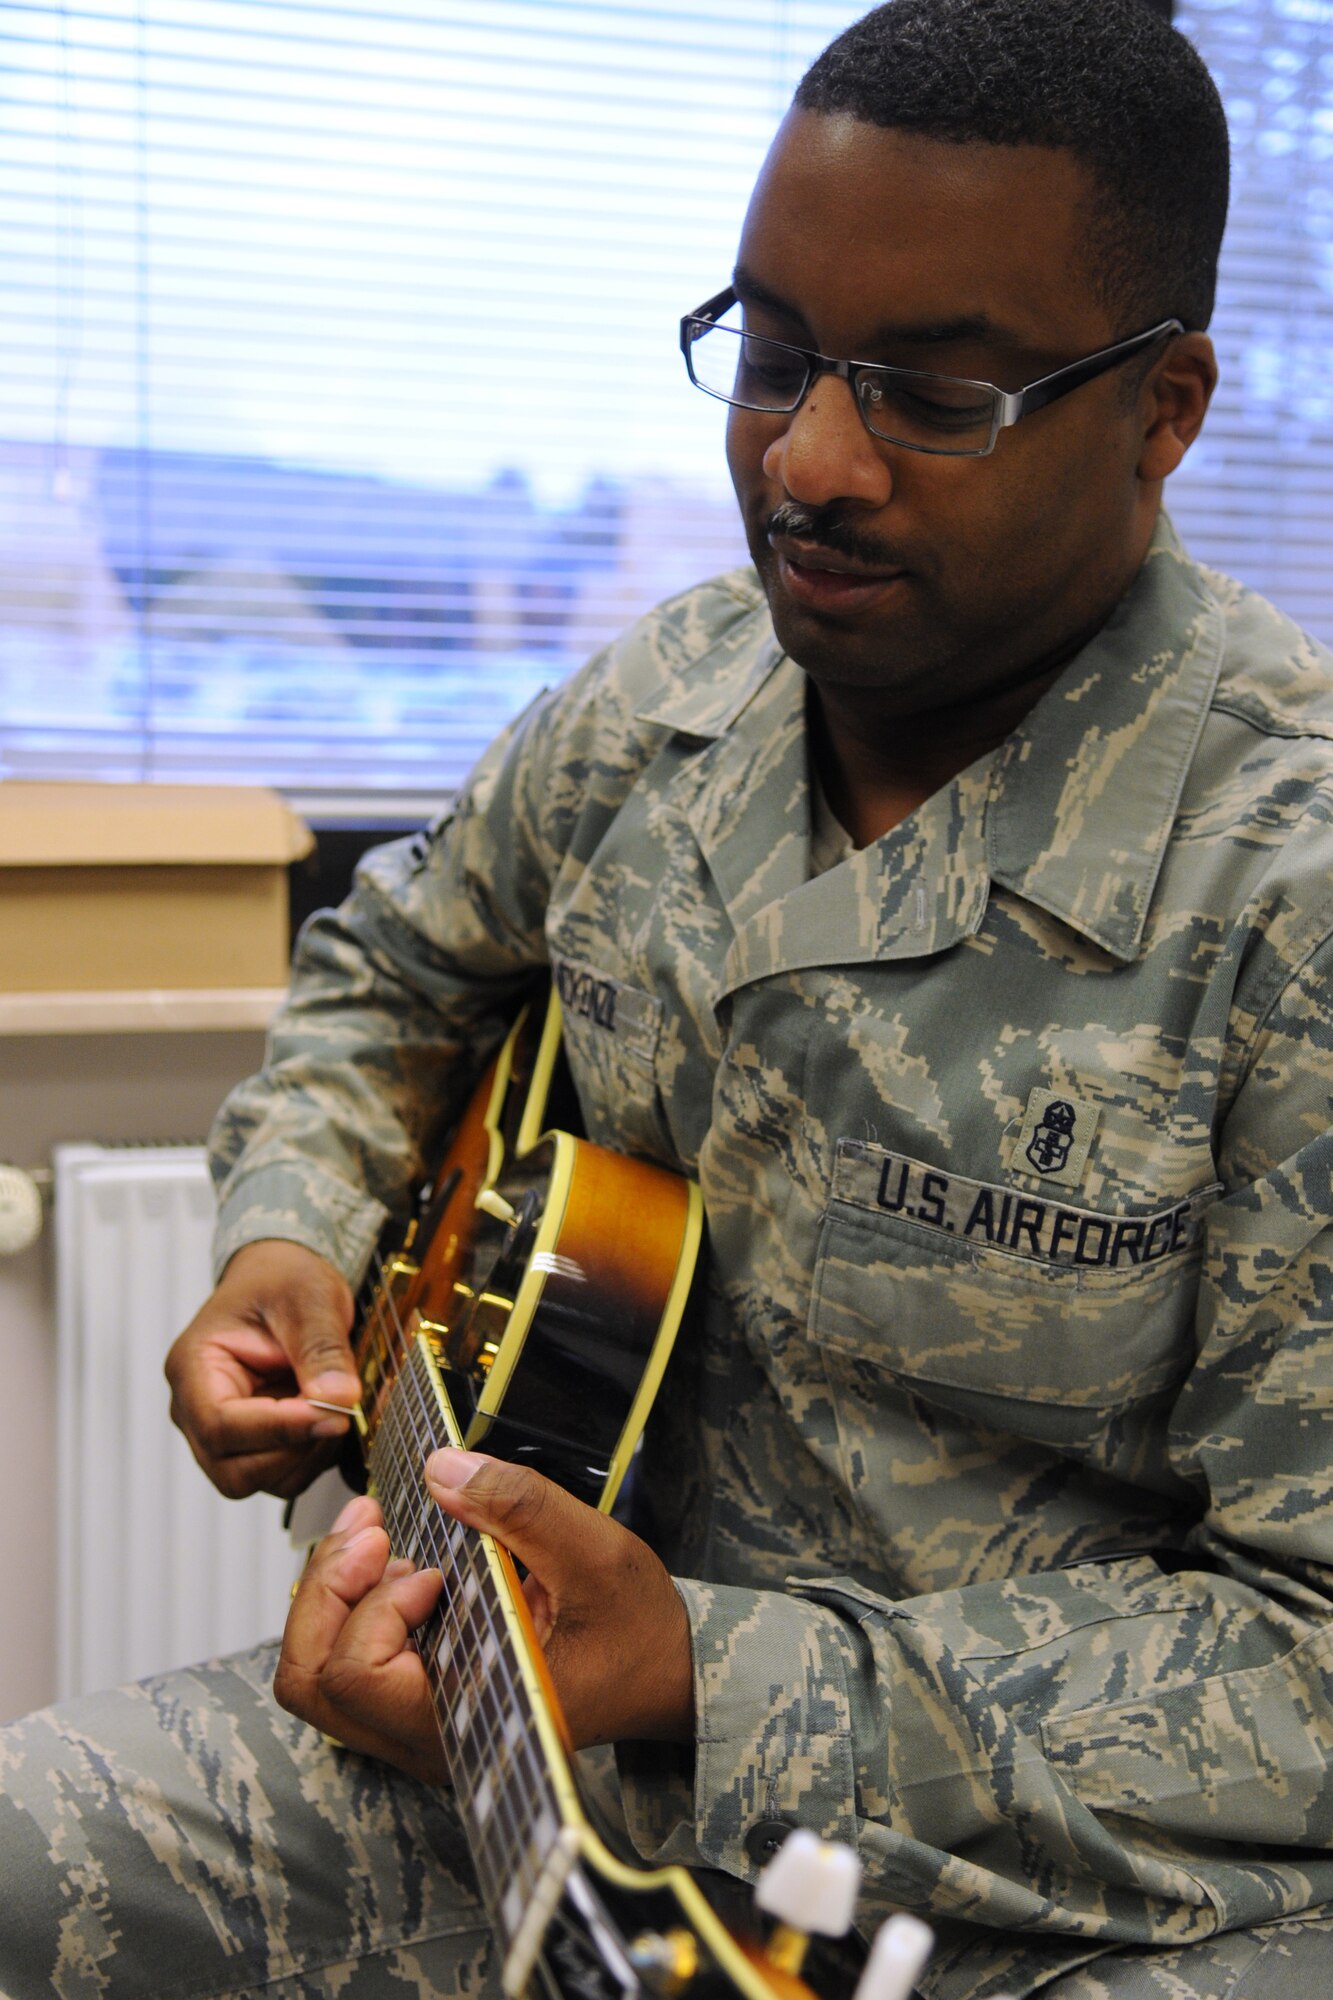 U.S. Air Force Senior Master Sgt. Bruce McKenzie, 86th Medical Operations Squadron superintendent, plays a six-stringed guitar at the Airman and Family Readiness Center open house for Air Force Family Week, Ramstein Air Base, Germany, Nov. 4, 2009. Nov 1st thru the 7th is designated by Secretary of the Air Force as "Air Force Family Week". (U.S. Air Force photo by Airman 1st Class Caleb Pierce)